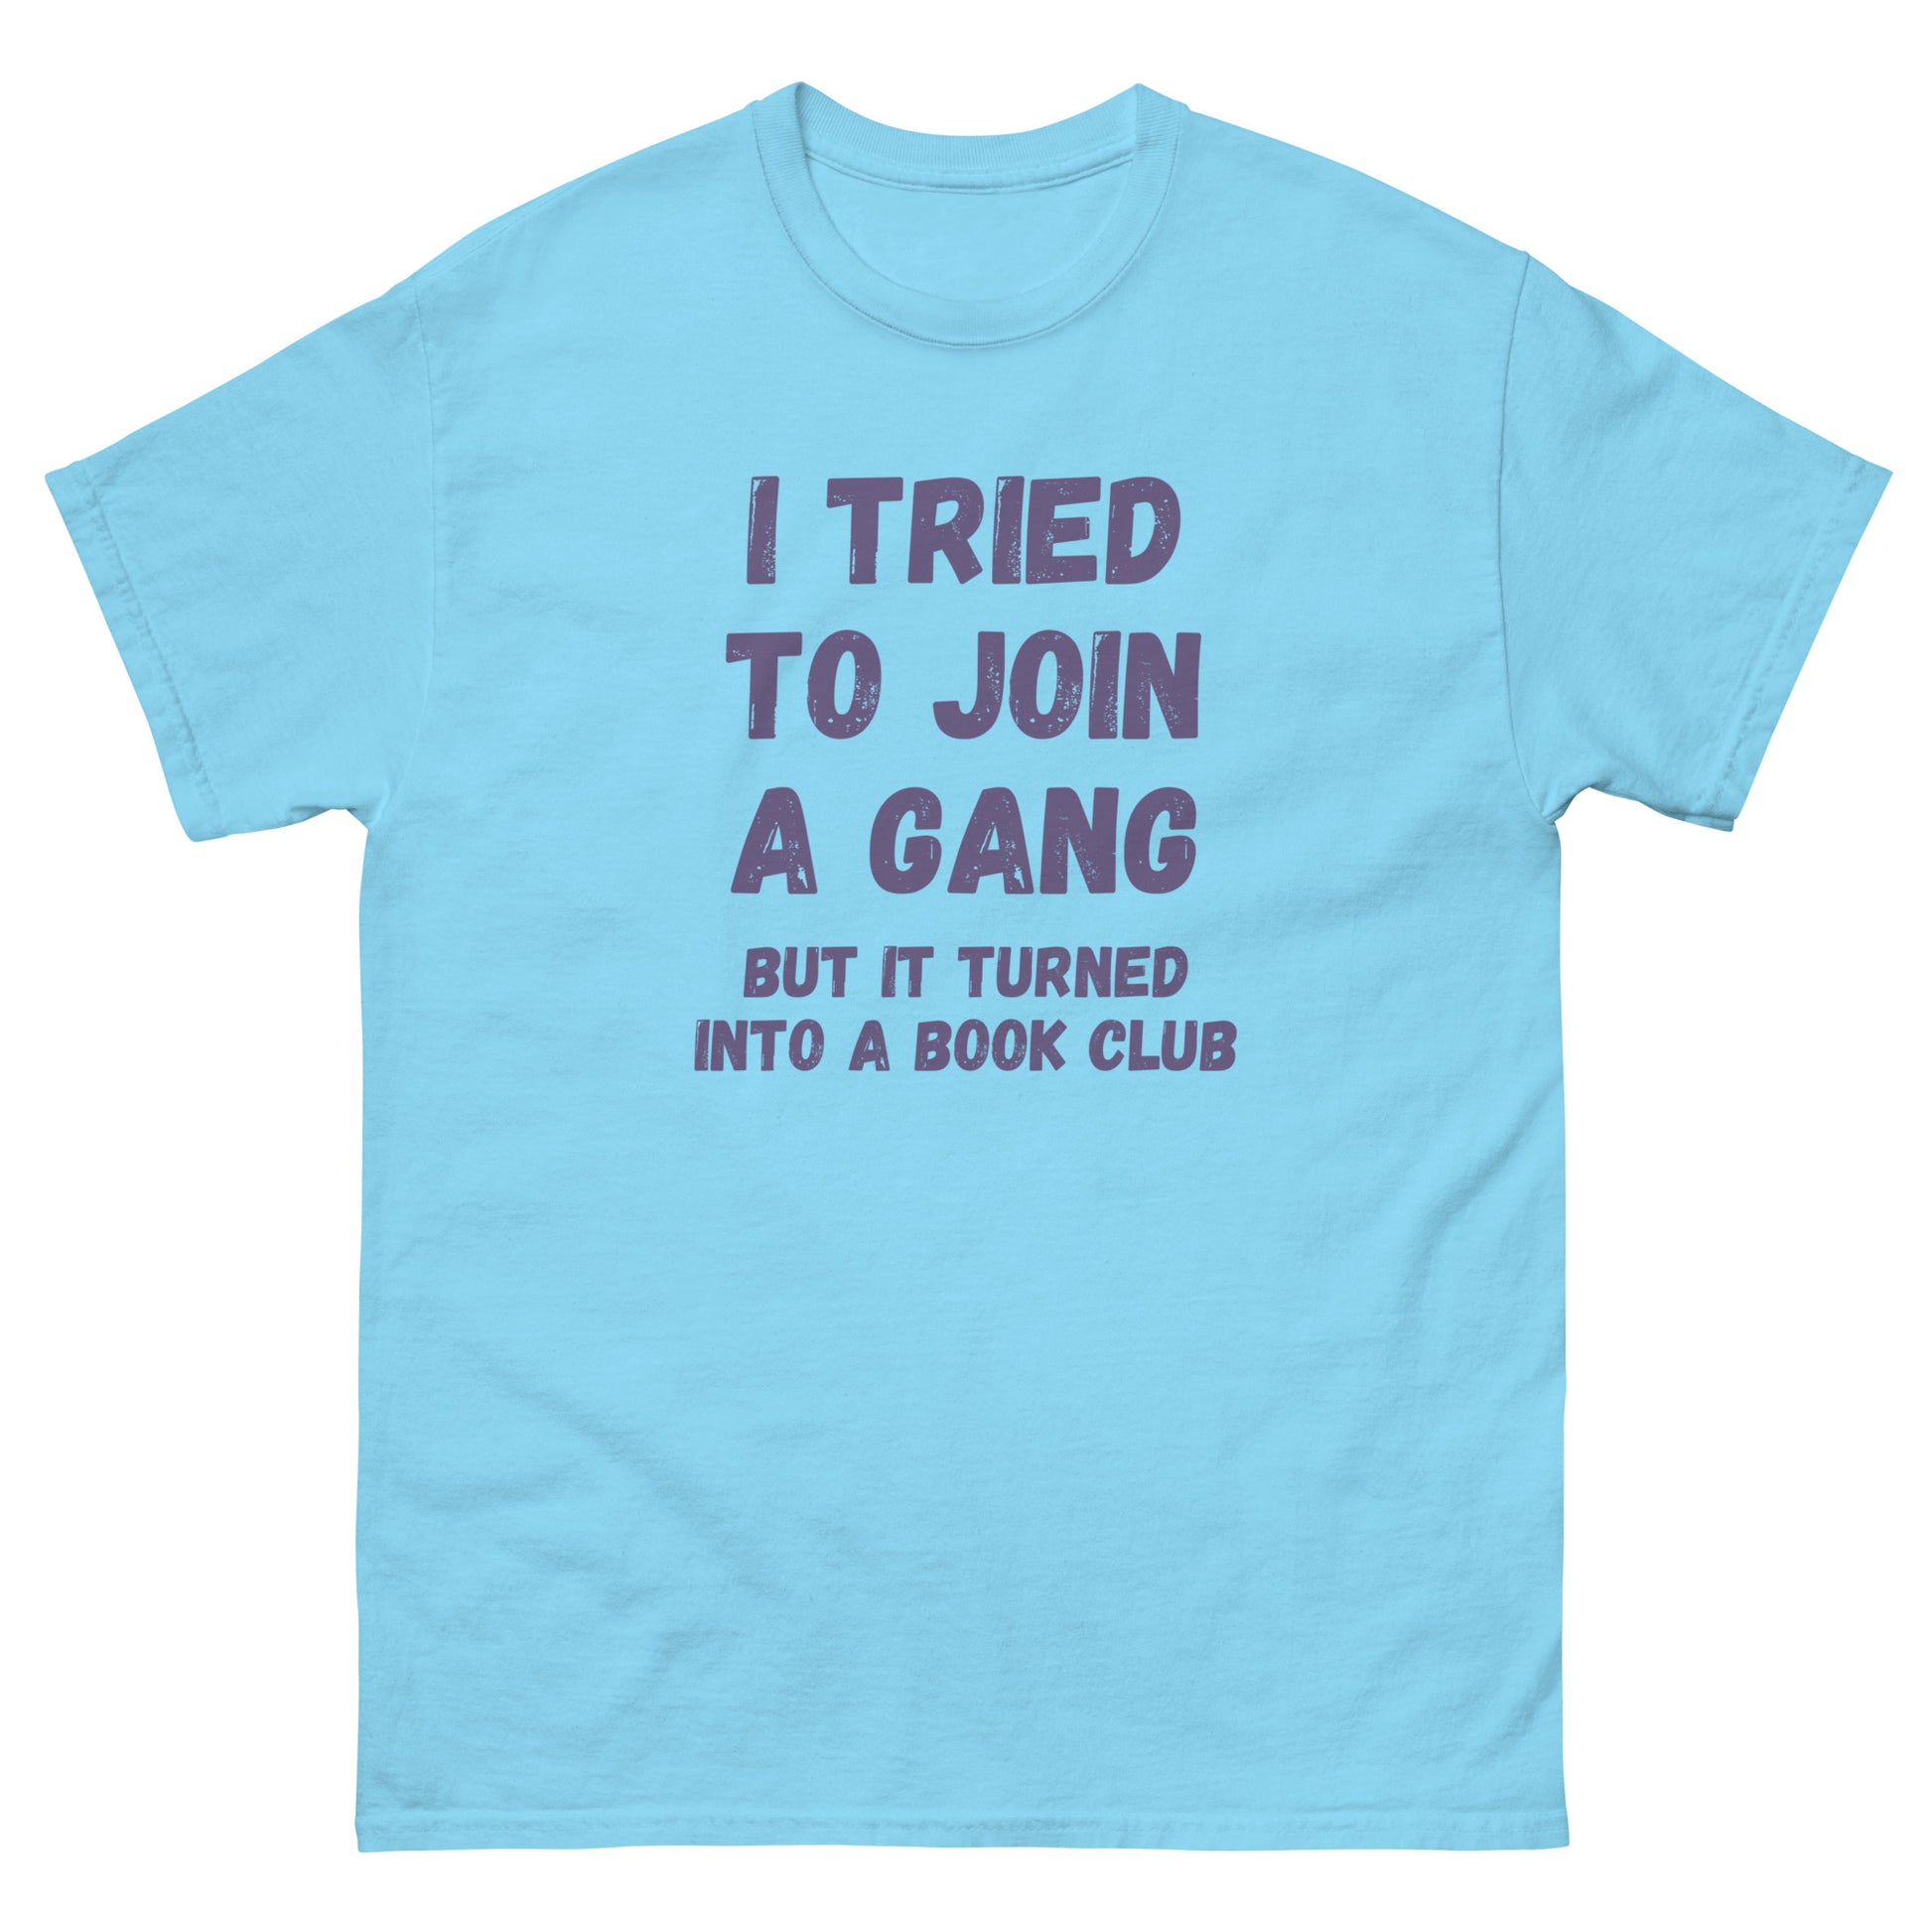 Join a Book Club Gang classic tee - Ghostly Tails